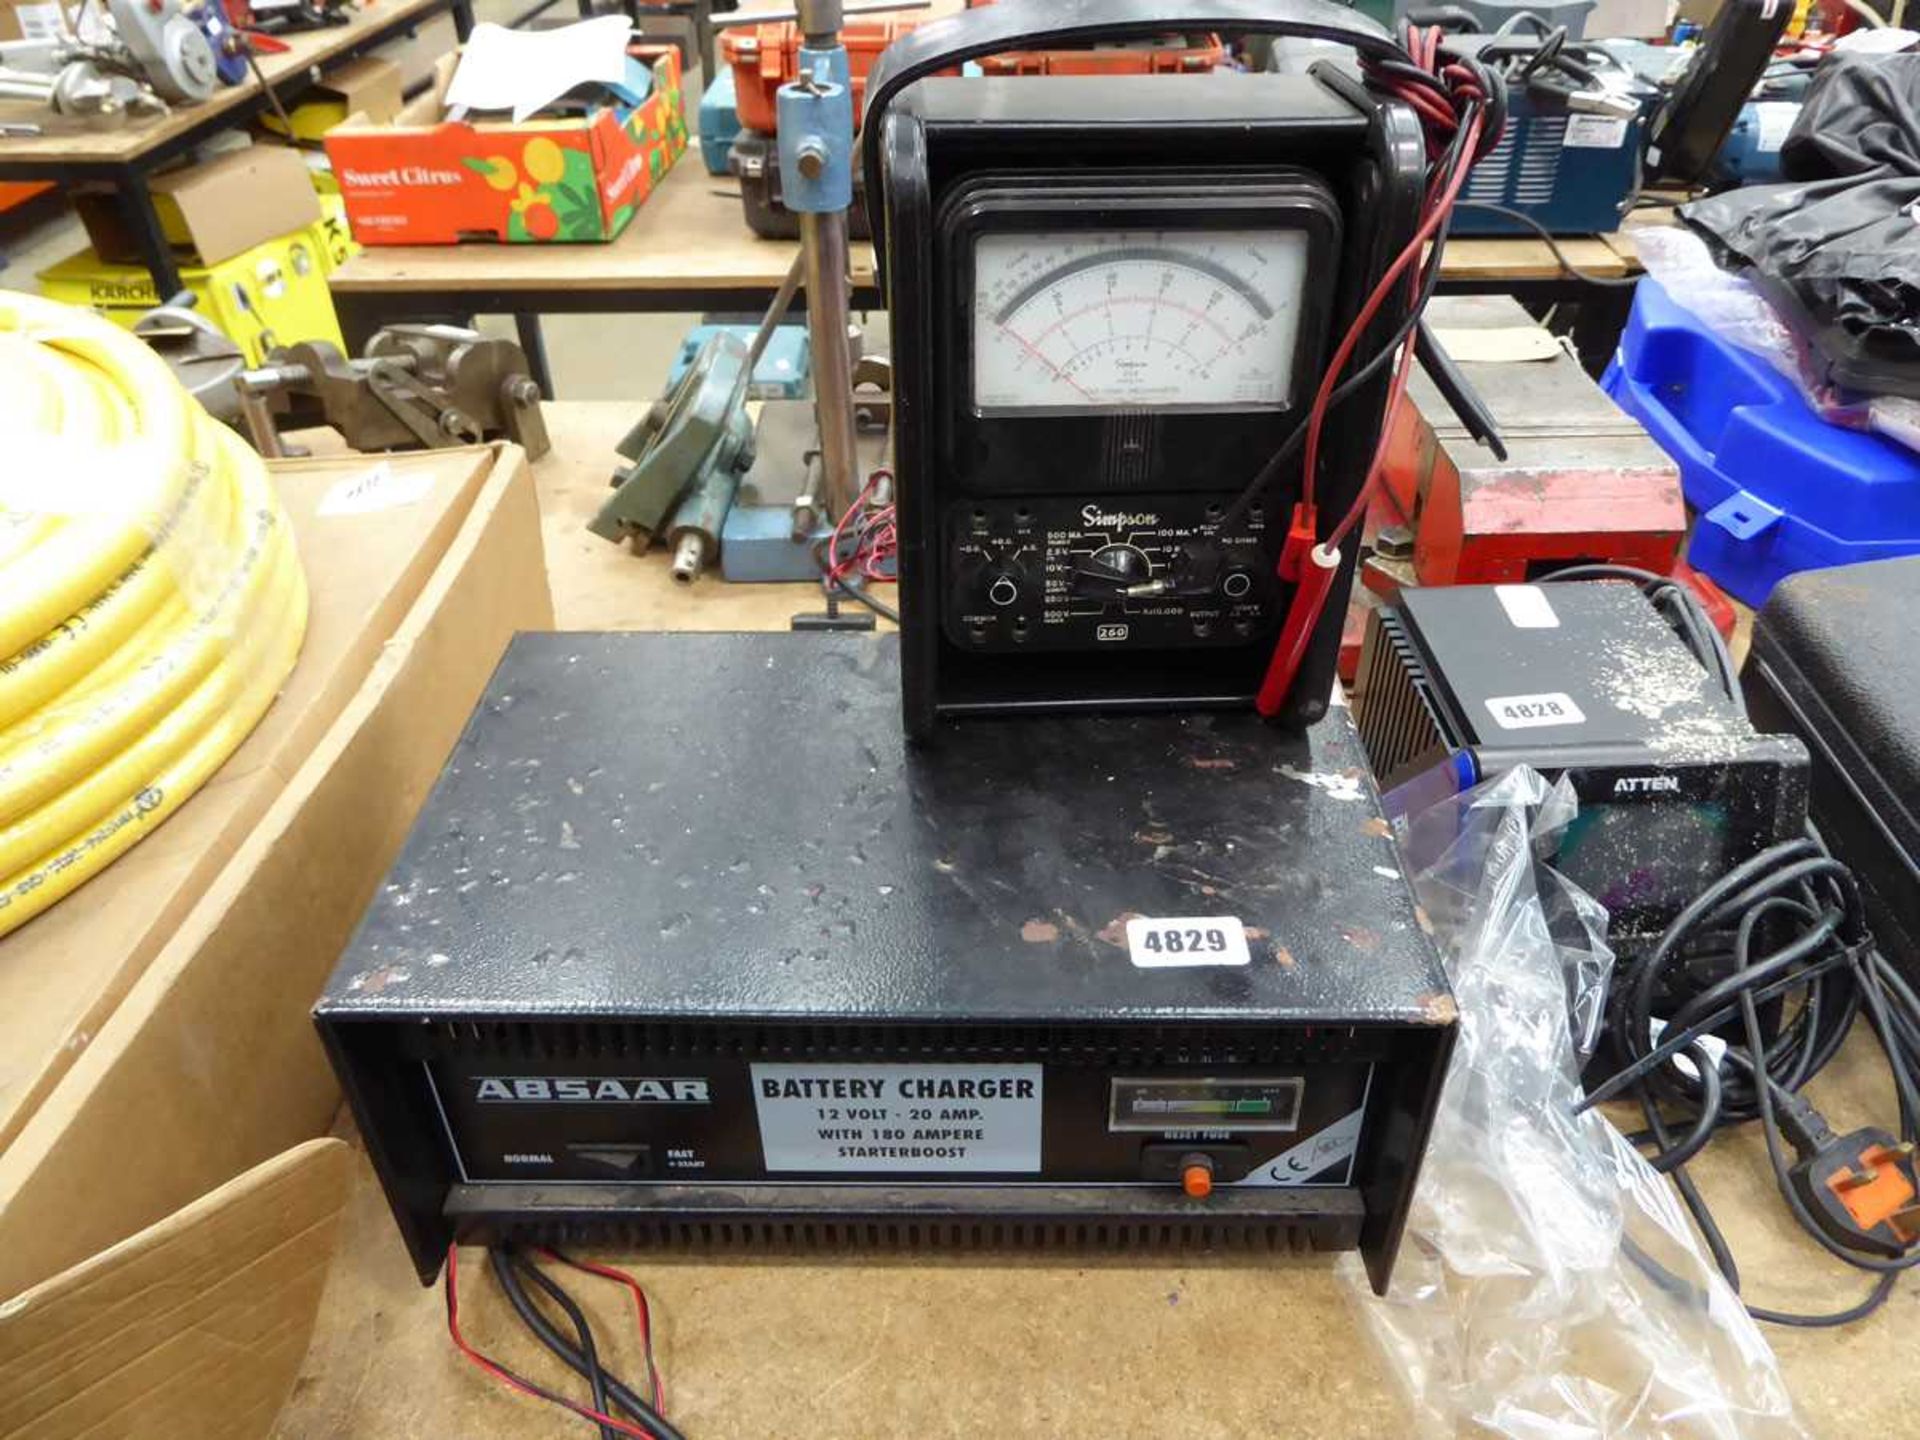 Absaar battery charger and Simpson vintage test meter